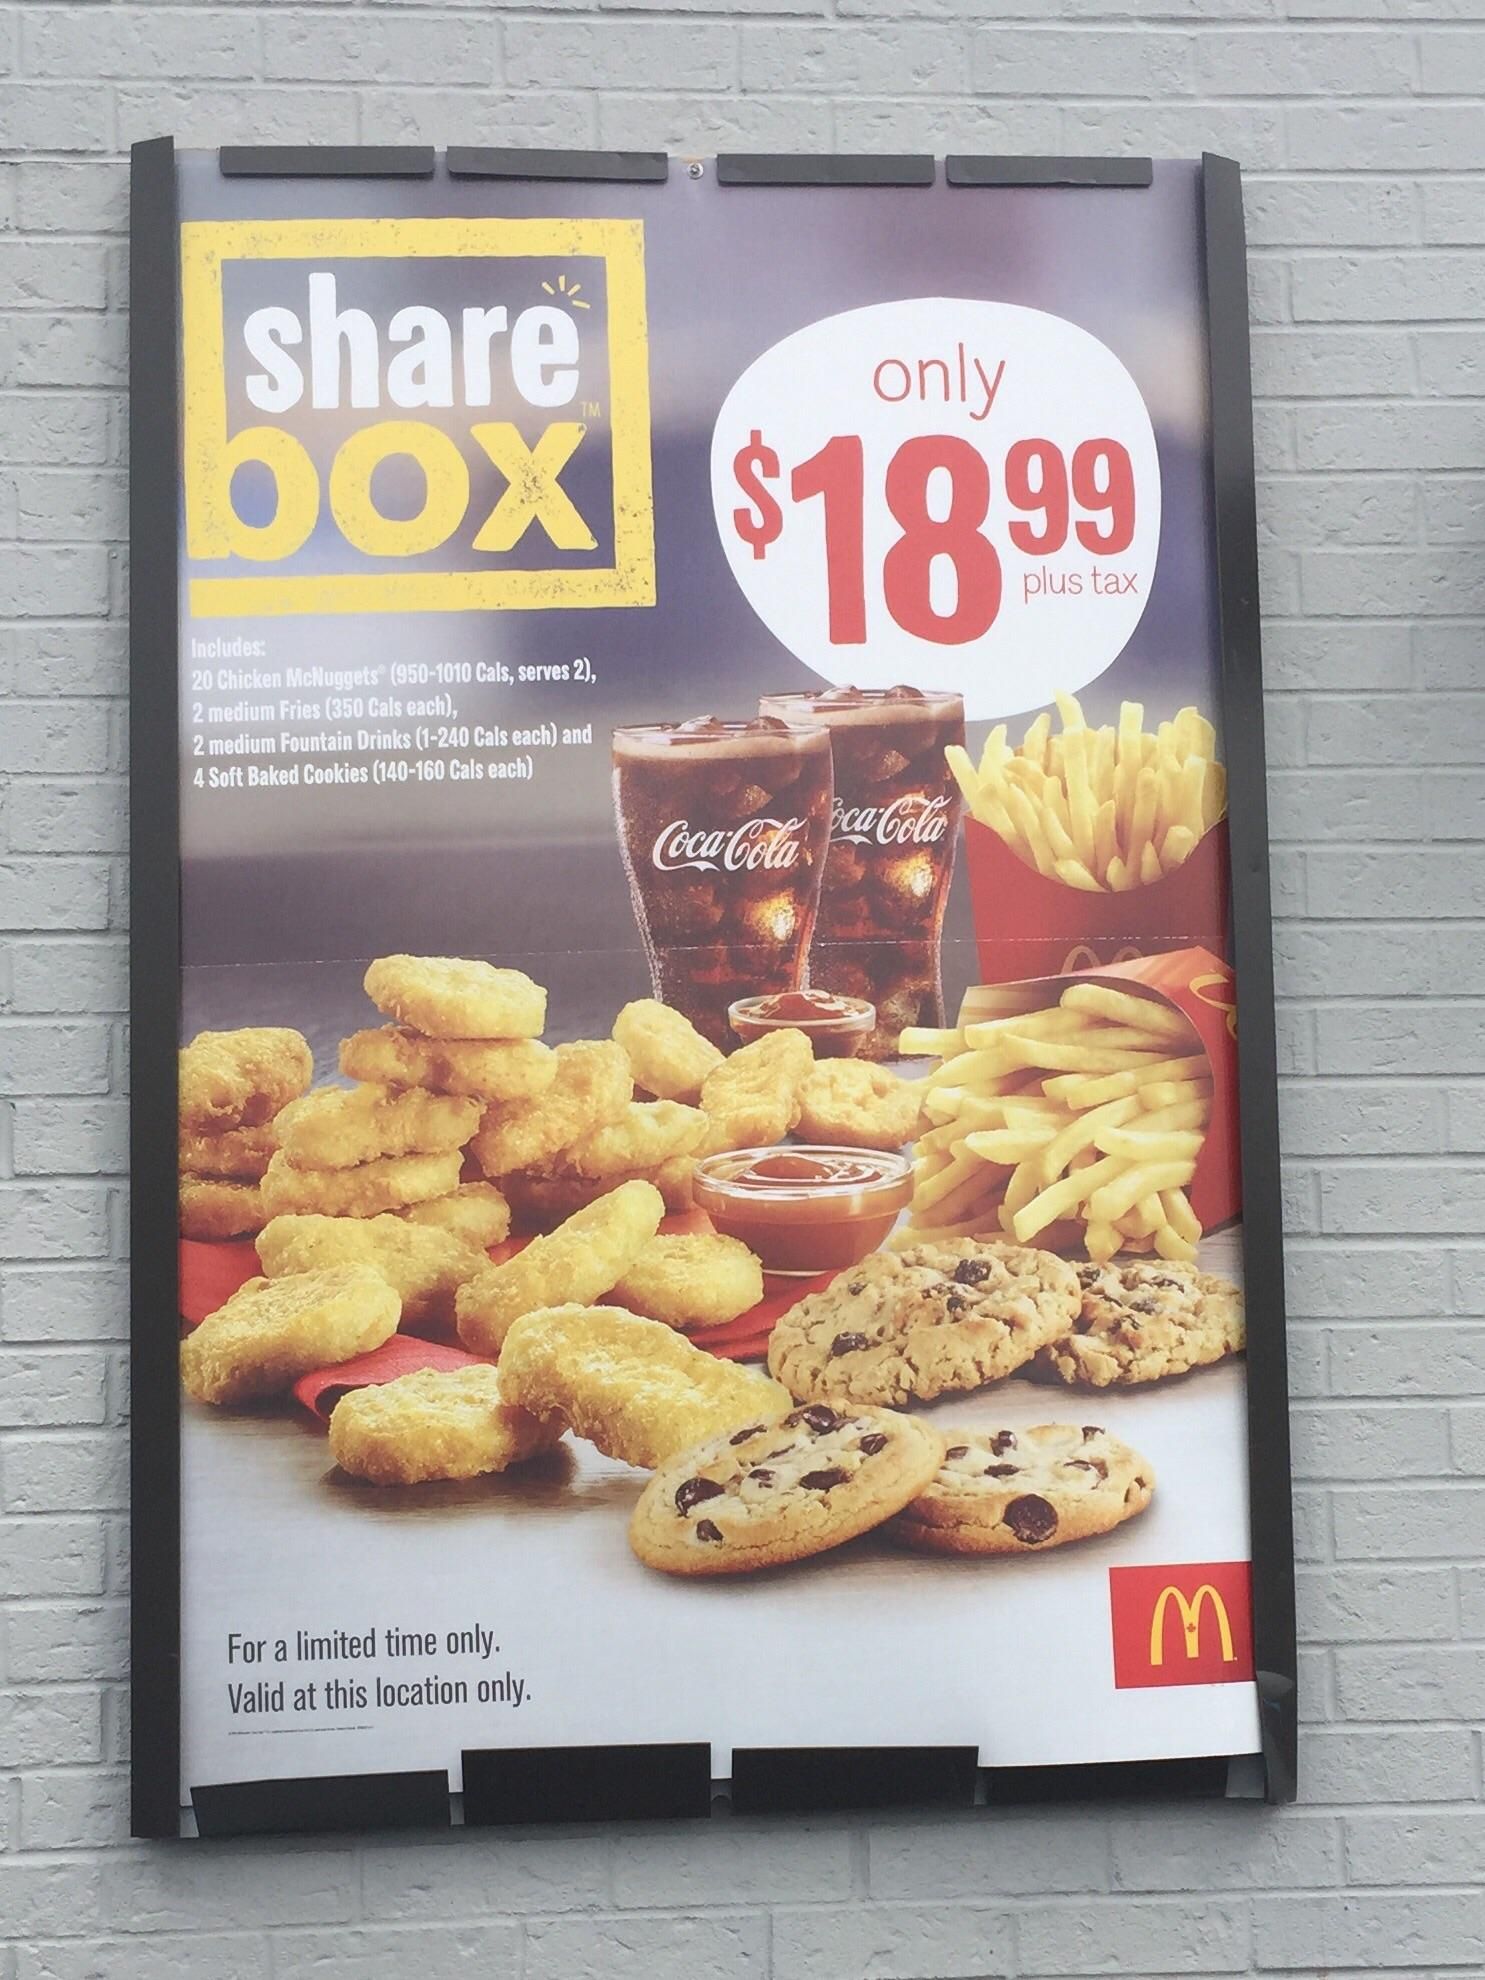 McDonald’s Canada is getting ready for marijuana legalization next month